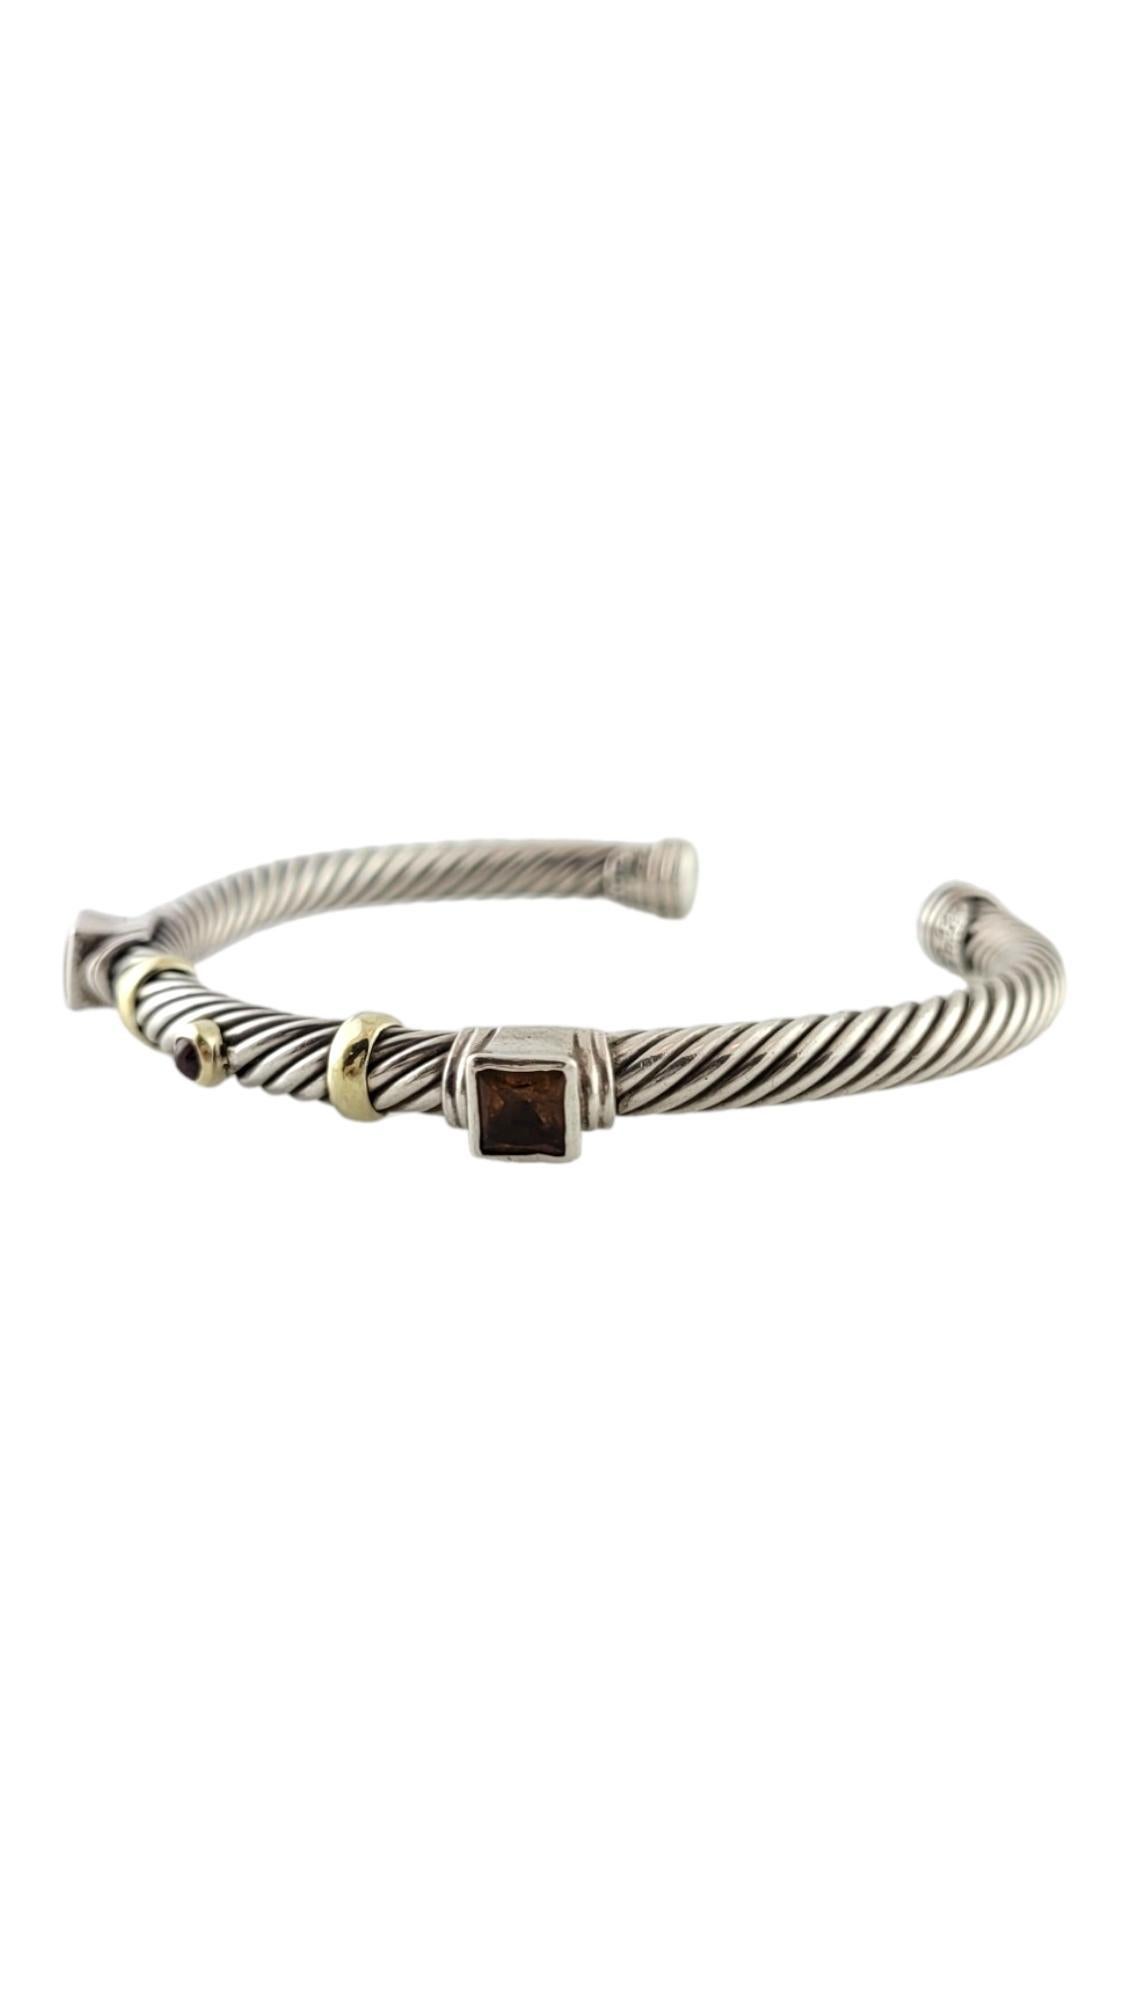 David Yurman 14K Yellow Gold & Sterling Silver Renaissance Cable Cuff Bracelet with Citrine & Tourmaline

This gorgeous bracelet by designer David Yurman is crafted from sterling silver with 14K yellow gold detailing. This piece also features 2